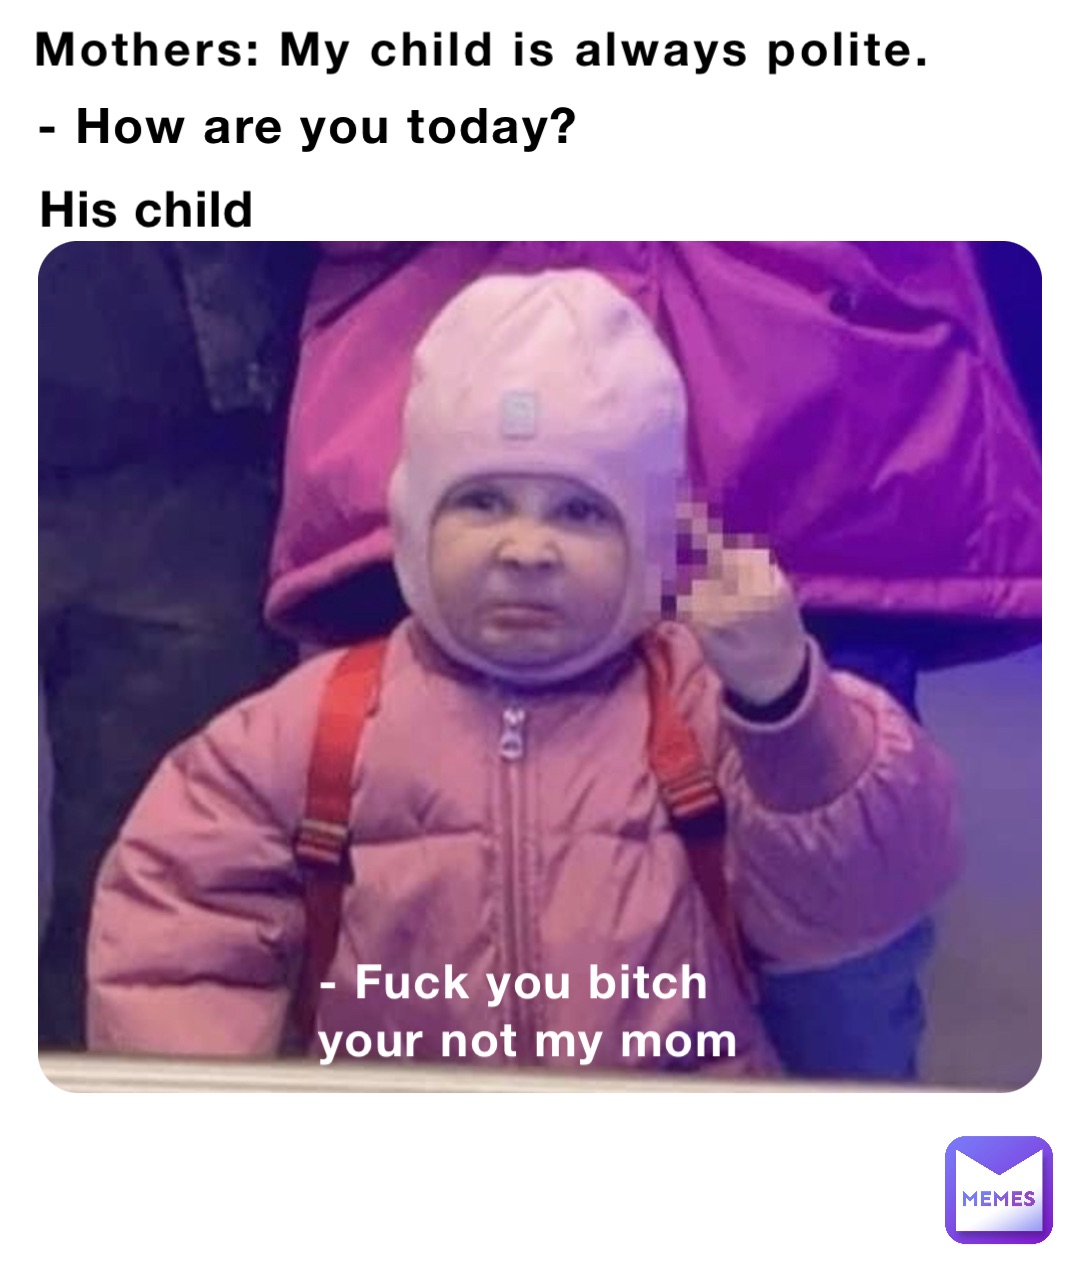 Mothers: My child is always polite. - How are you today? His child - Fuck you bitch your not my mom